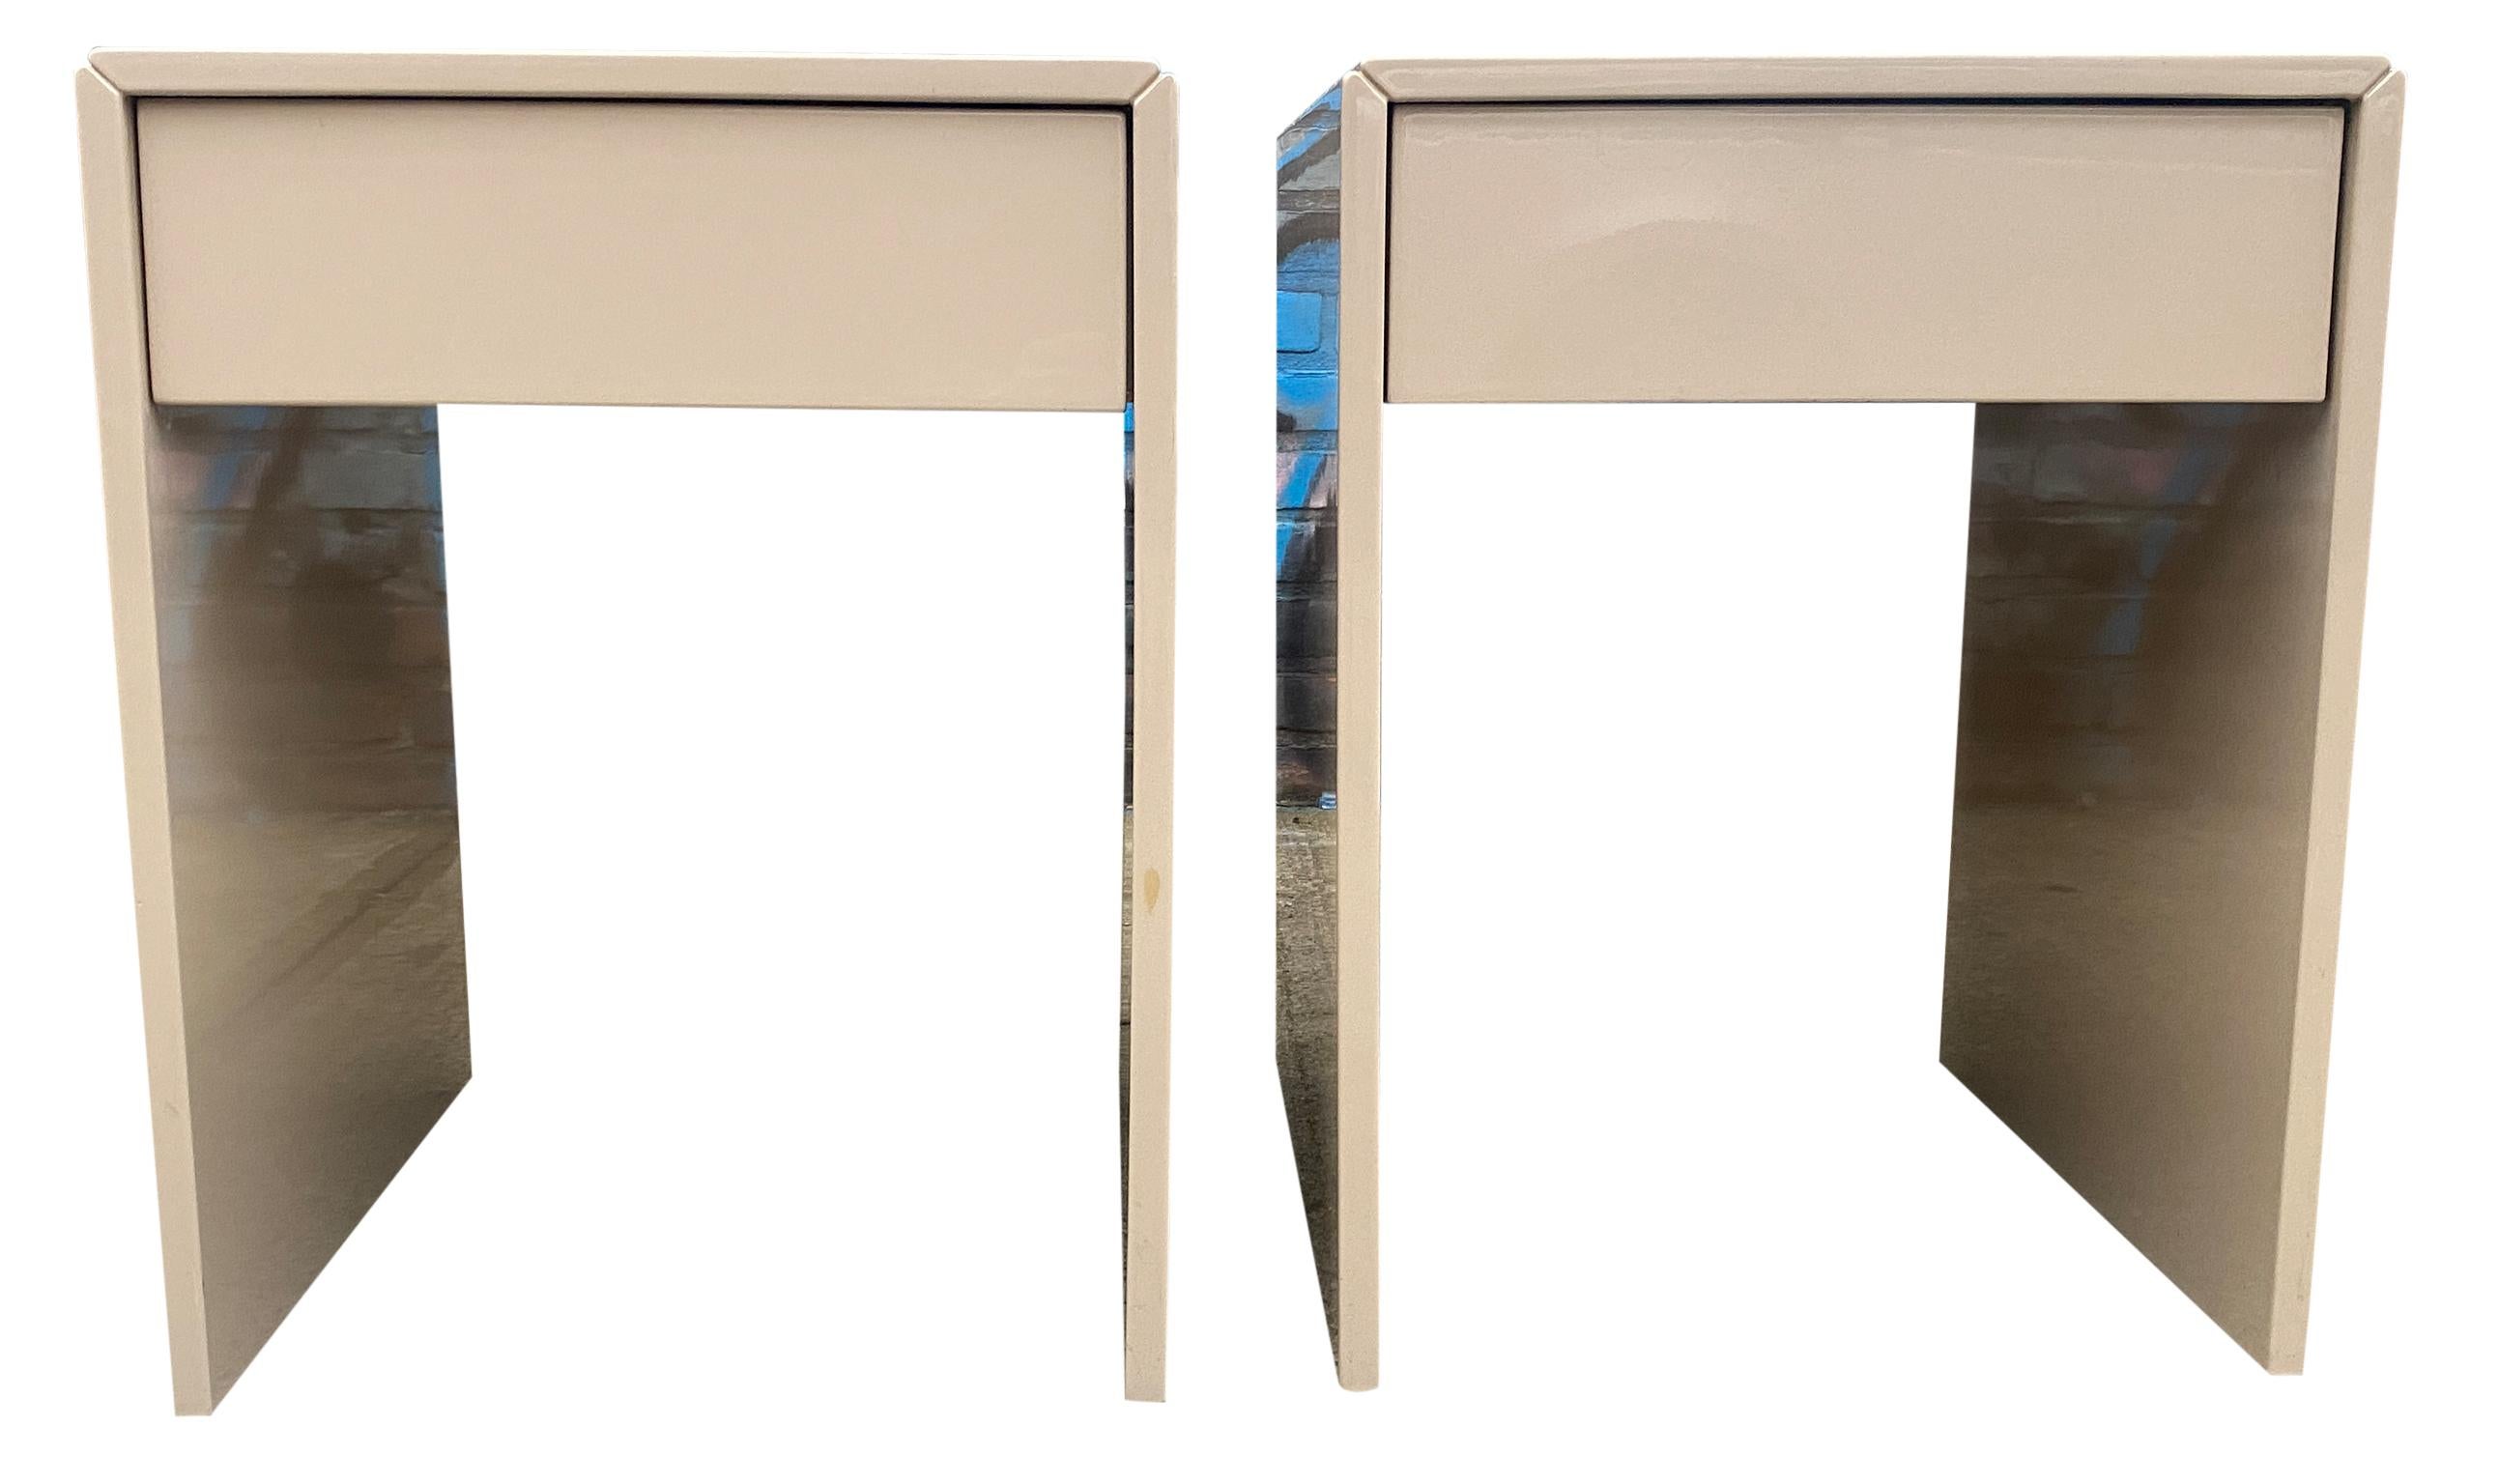 Pair of petite minimalist mid century Paul Mayen high gloss taupe nightstands with single drawer for habitat. High Gloss finish in Taupe. Solid wood construction with drawer slides. Labeled underneath. Circa 1970.